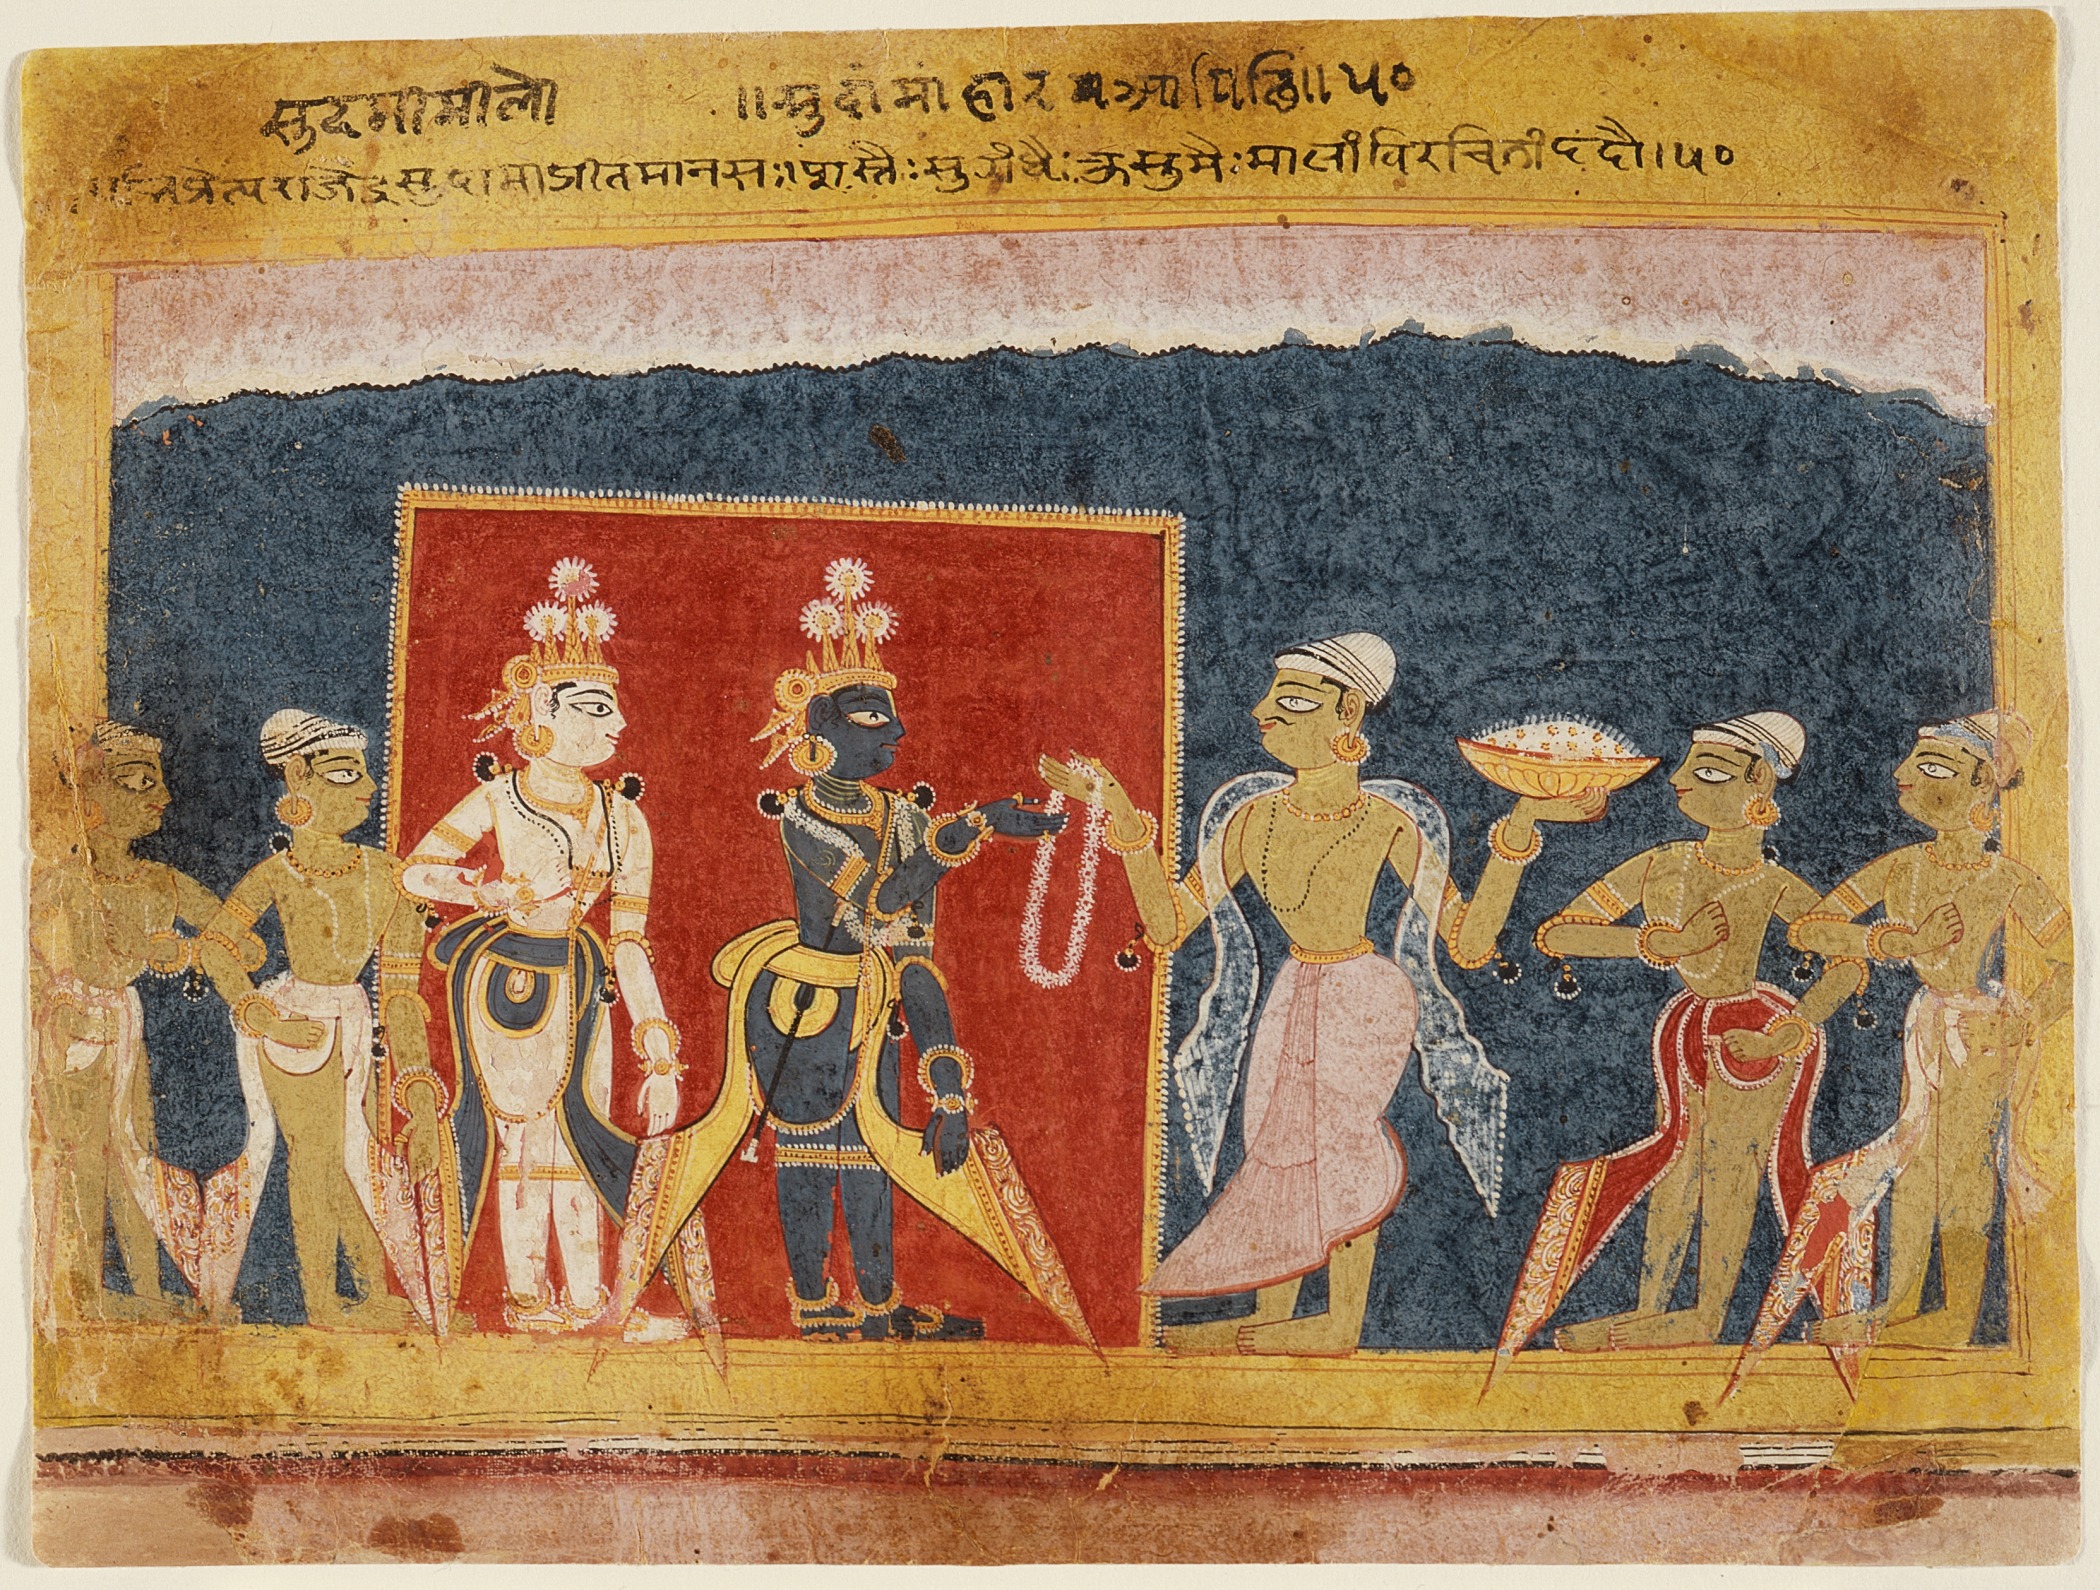 Sudama_Offers_a_Garland_to_Krishna,_Folio_from_a_Bhagavata_Purana_(Ancient_Stories_of_the_Lord)_LACMA_M.83.219.3.jpg